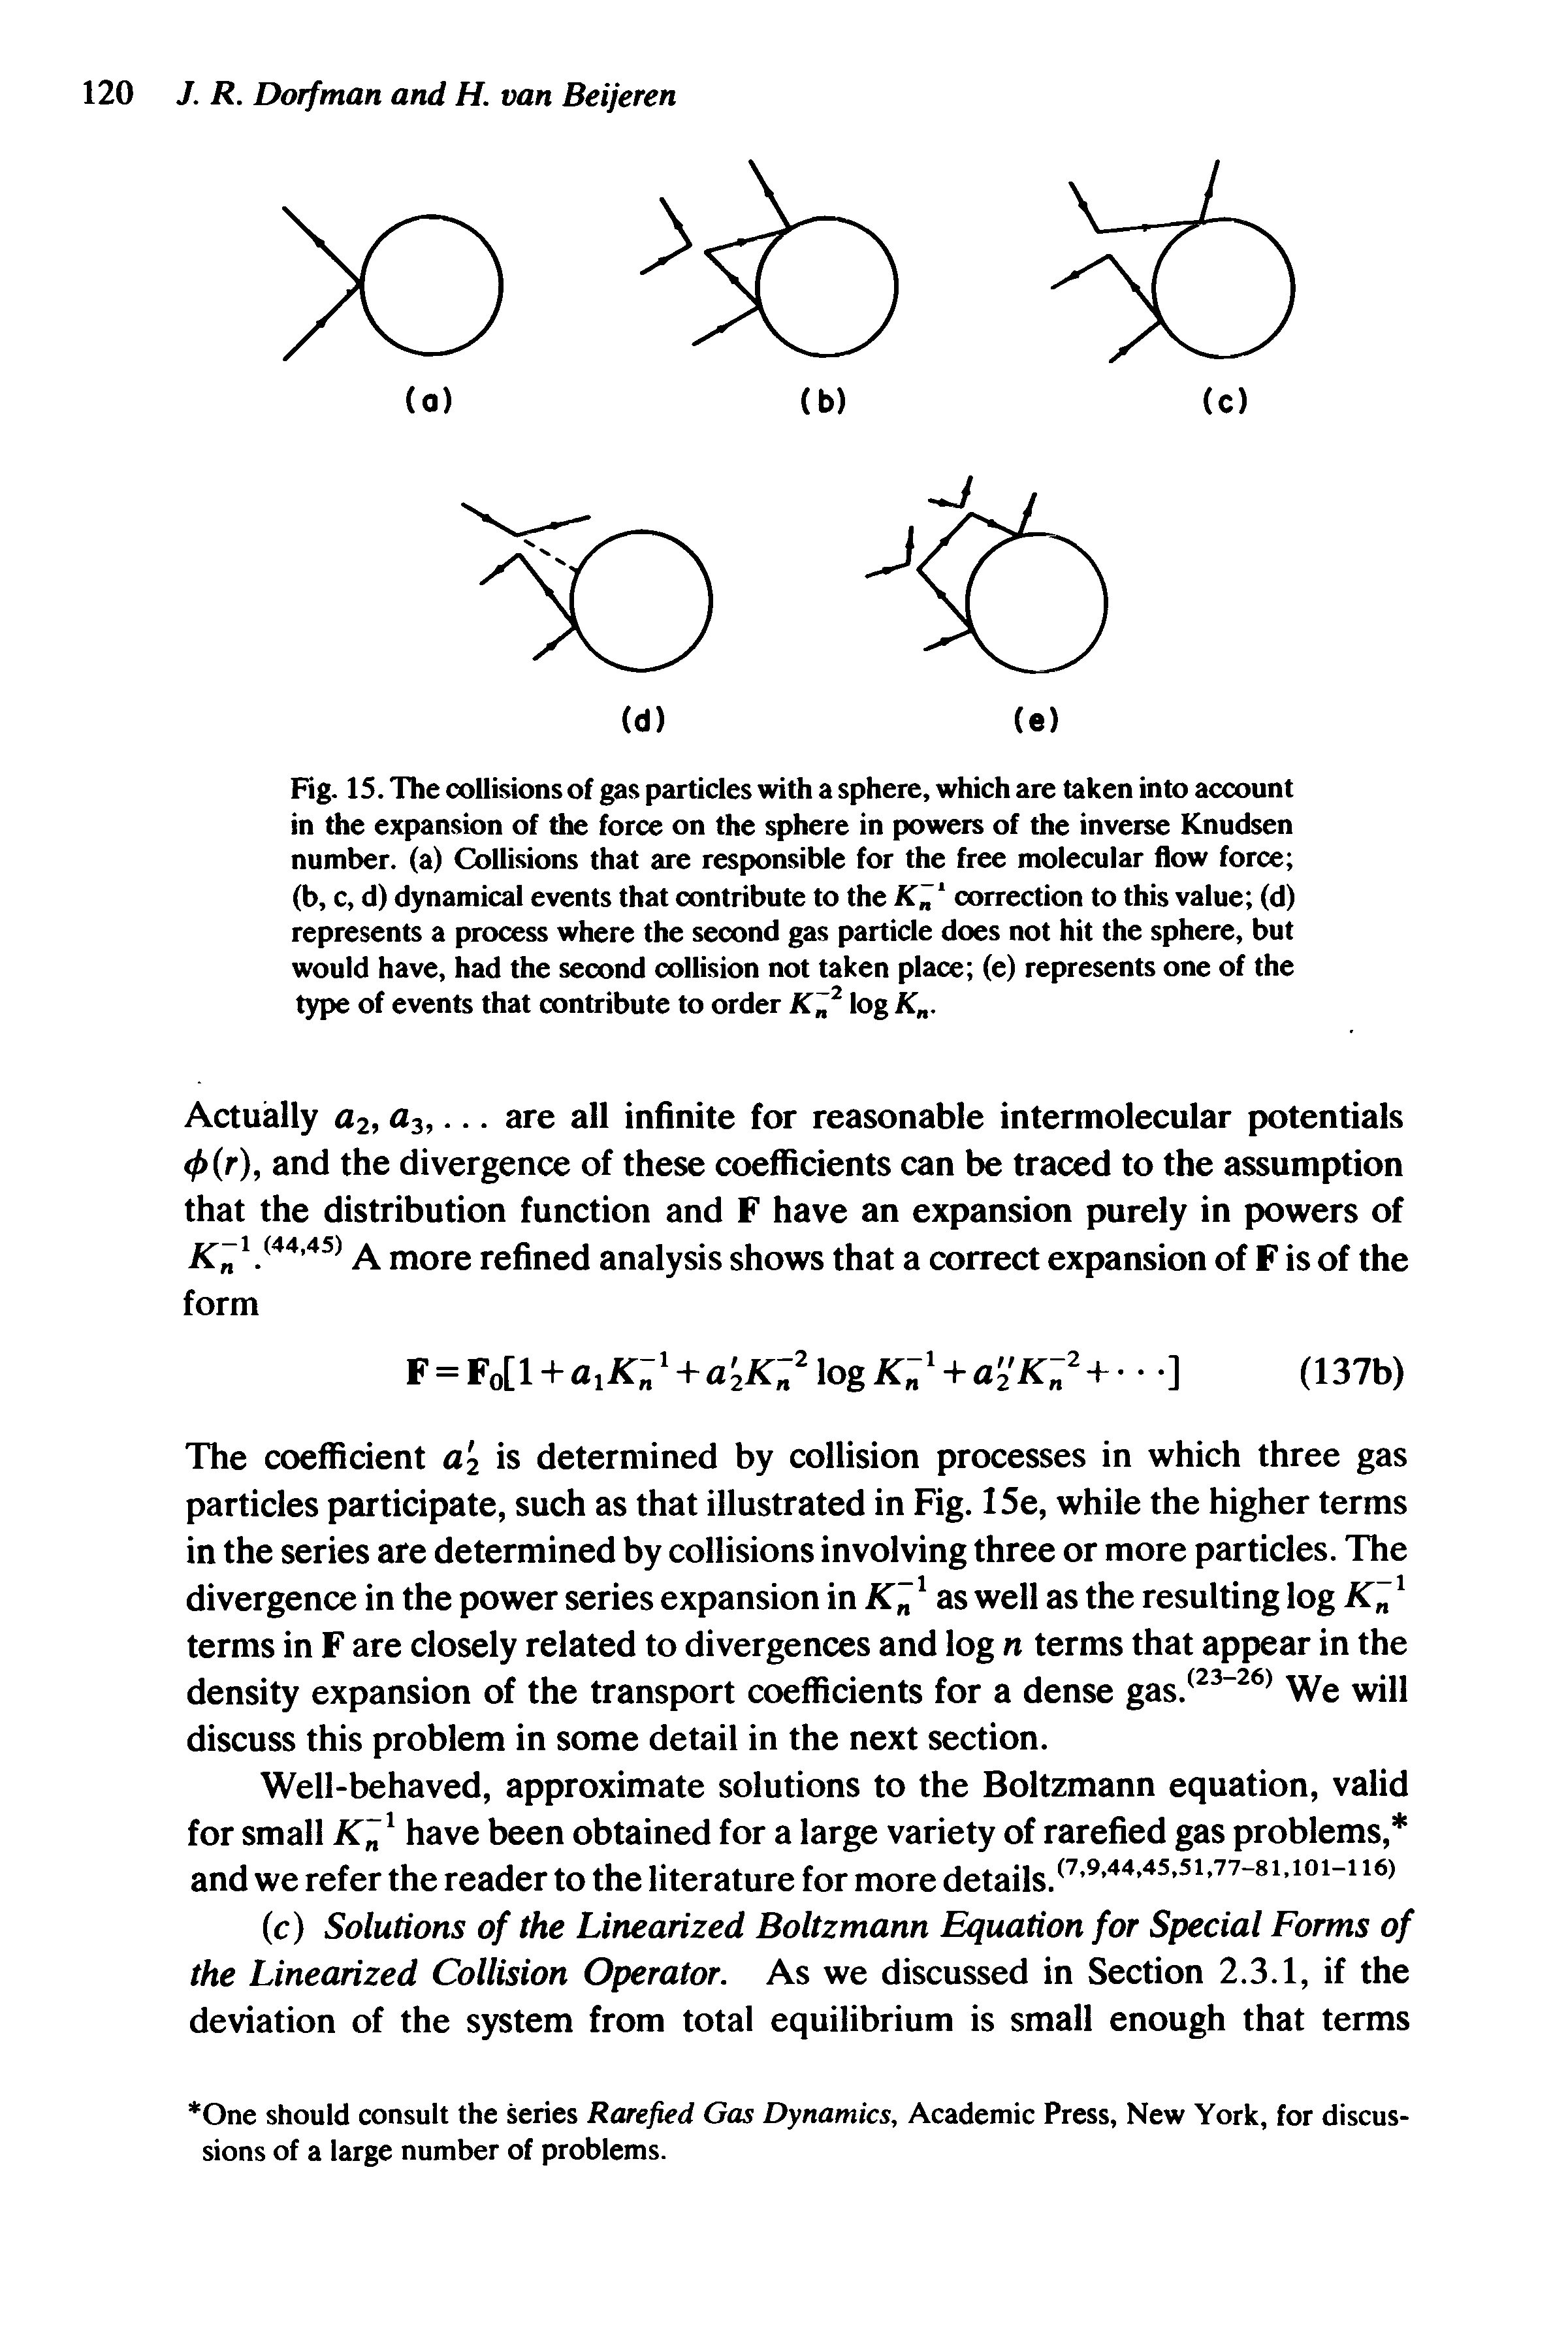 Fig. IS. The collisions of gas particles with a sphere, which are taken into account in the expansion of the force on the sphere in powers of the inverse Knudsen number, (a) Collisions that are responsible for the free molecular flow force (b, c, d) dynamical events that contribute to the K correction to this value (d) represents a process where the second gas particle does not hit the sphere, but would have, had the second collision not taken place (e) represents one of the type of events that contribute to order log K .